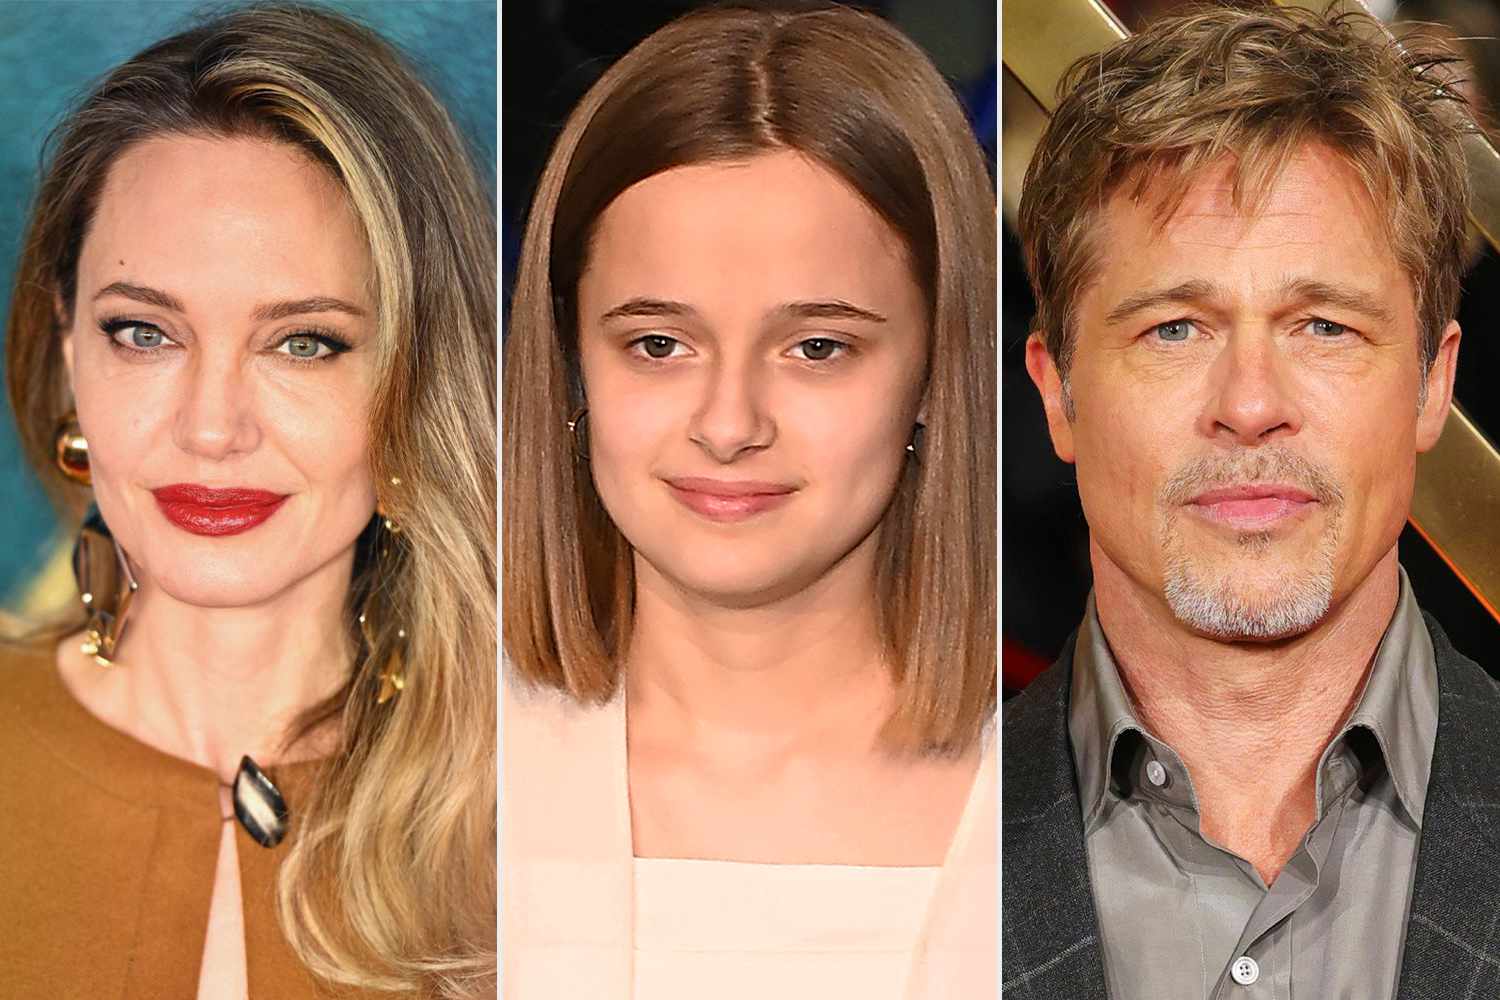 Angelina Jolie and Brad Pitt's Daughter Vivienne, 15, Listed as 'Vivienne Jolie' in 'The Outsiders' Playbill